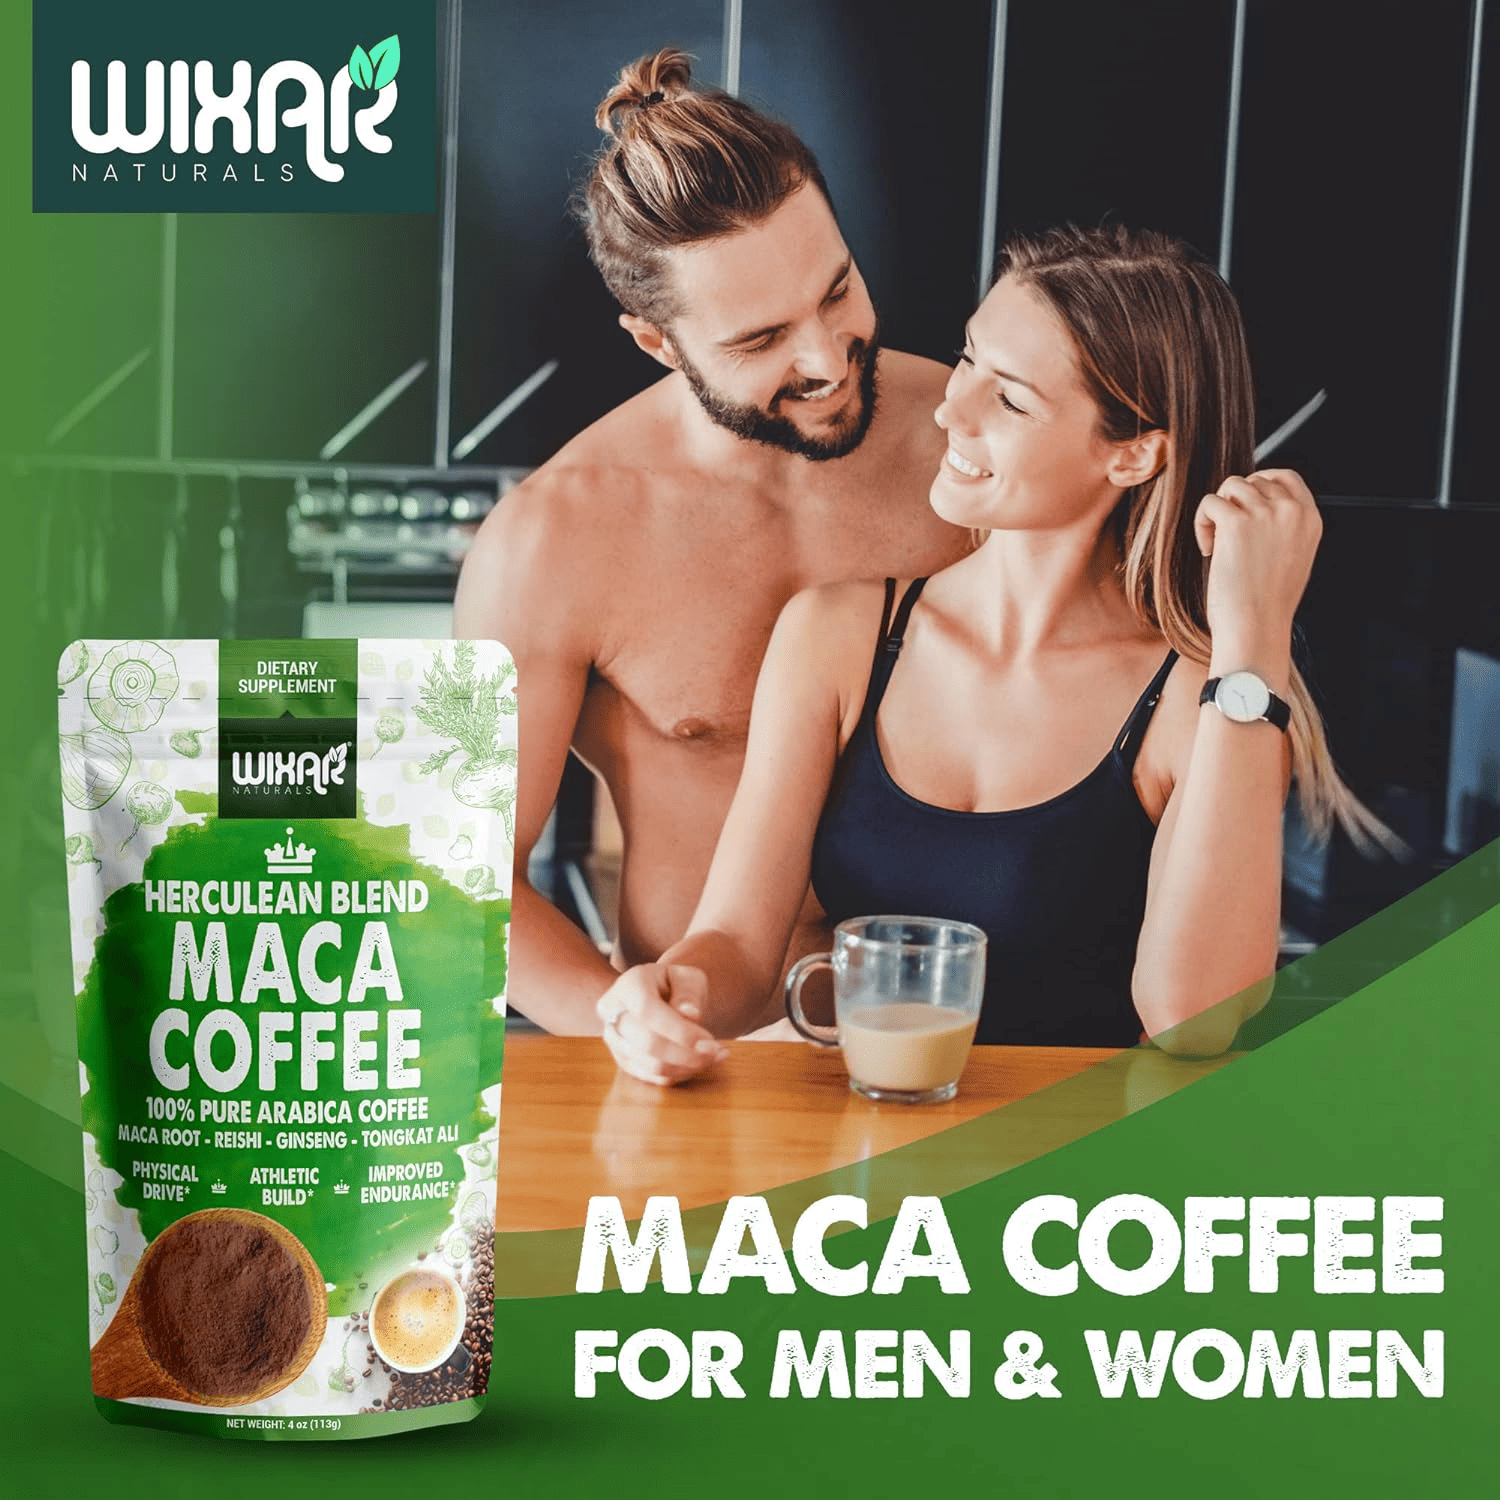 Maca coffee may offer potential benefits for sexual and reproductive health and fertility